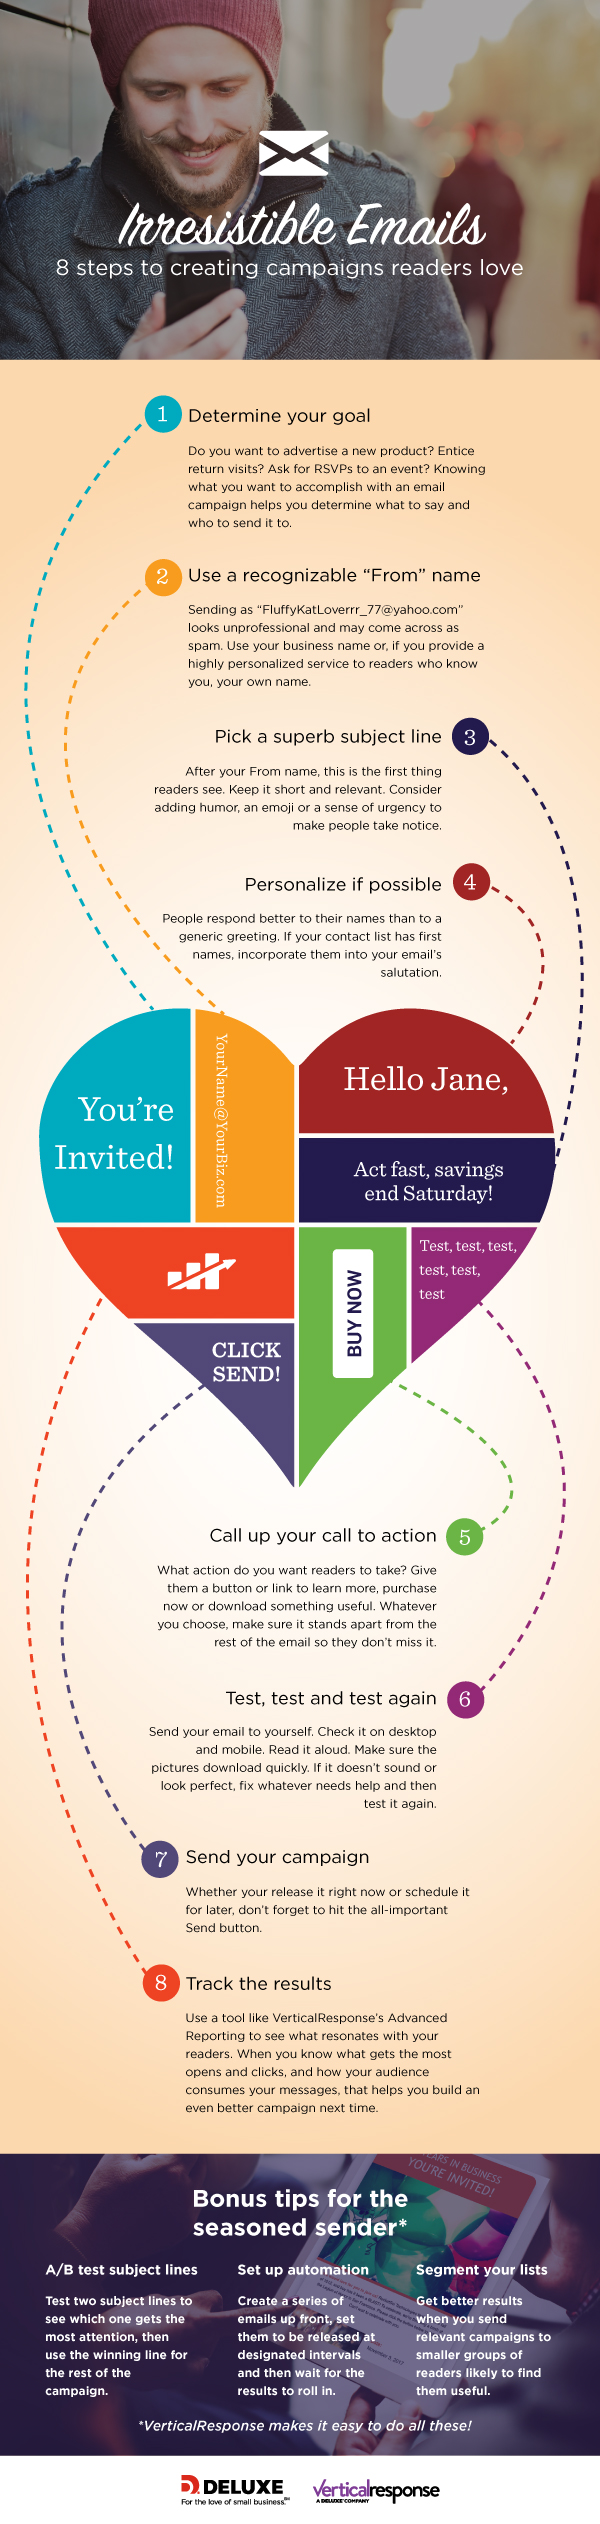 Infographic about creating an effective email campaign as listed in post.